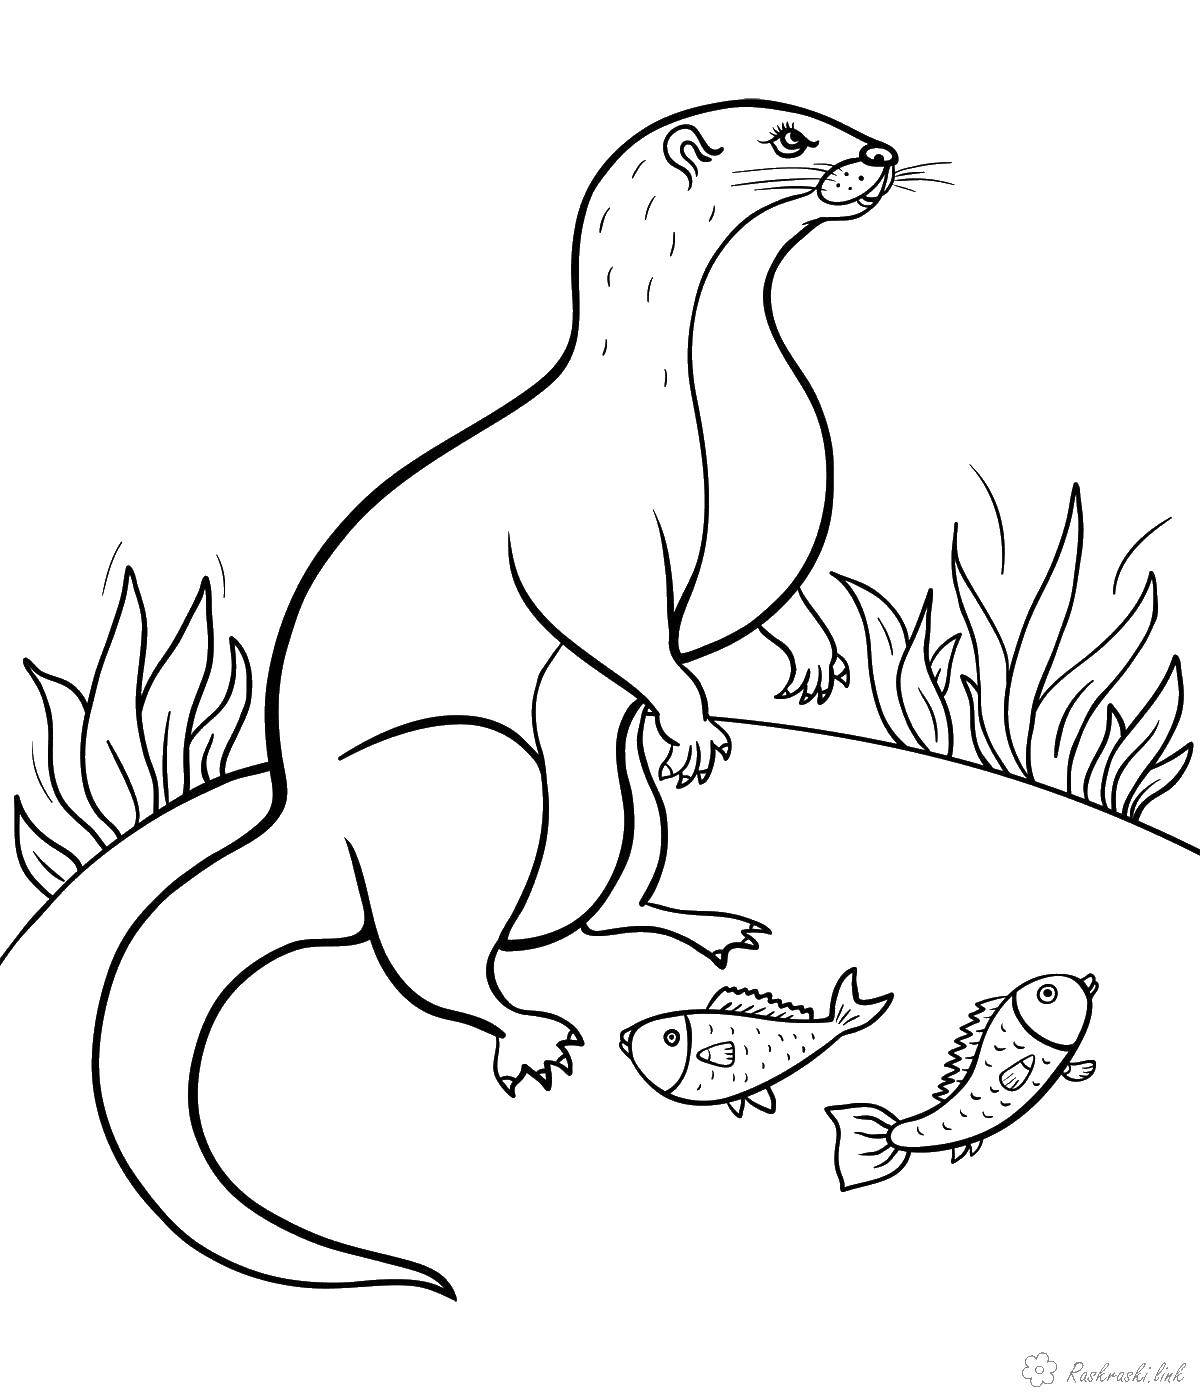 Coloring Mongoose. Category wild animals. Tags:  mongoose.